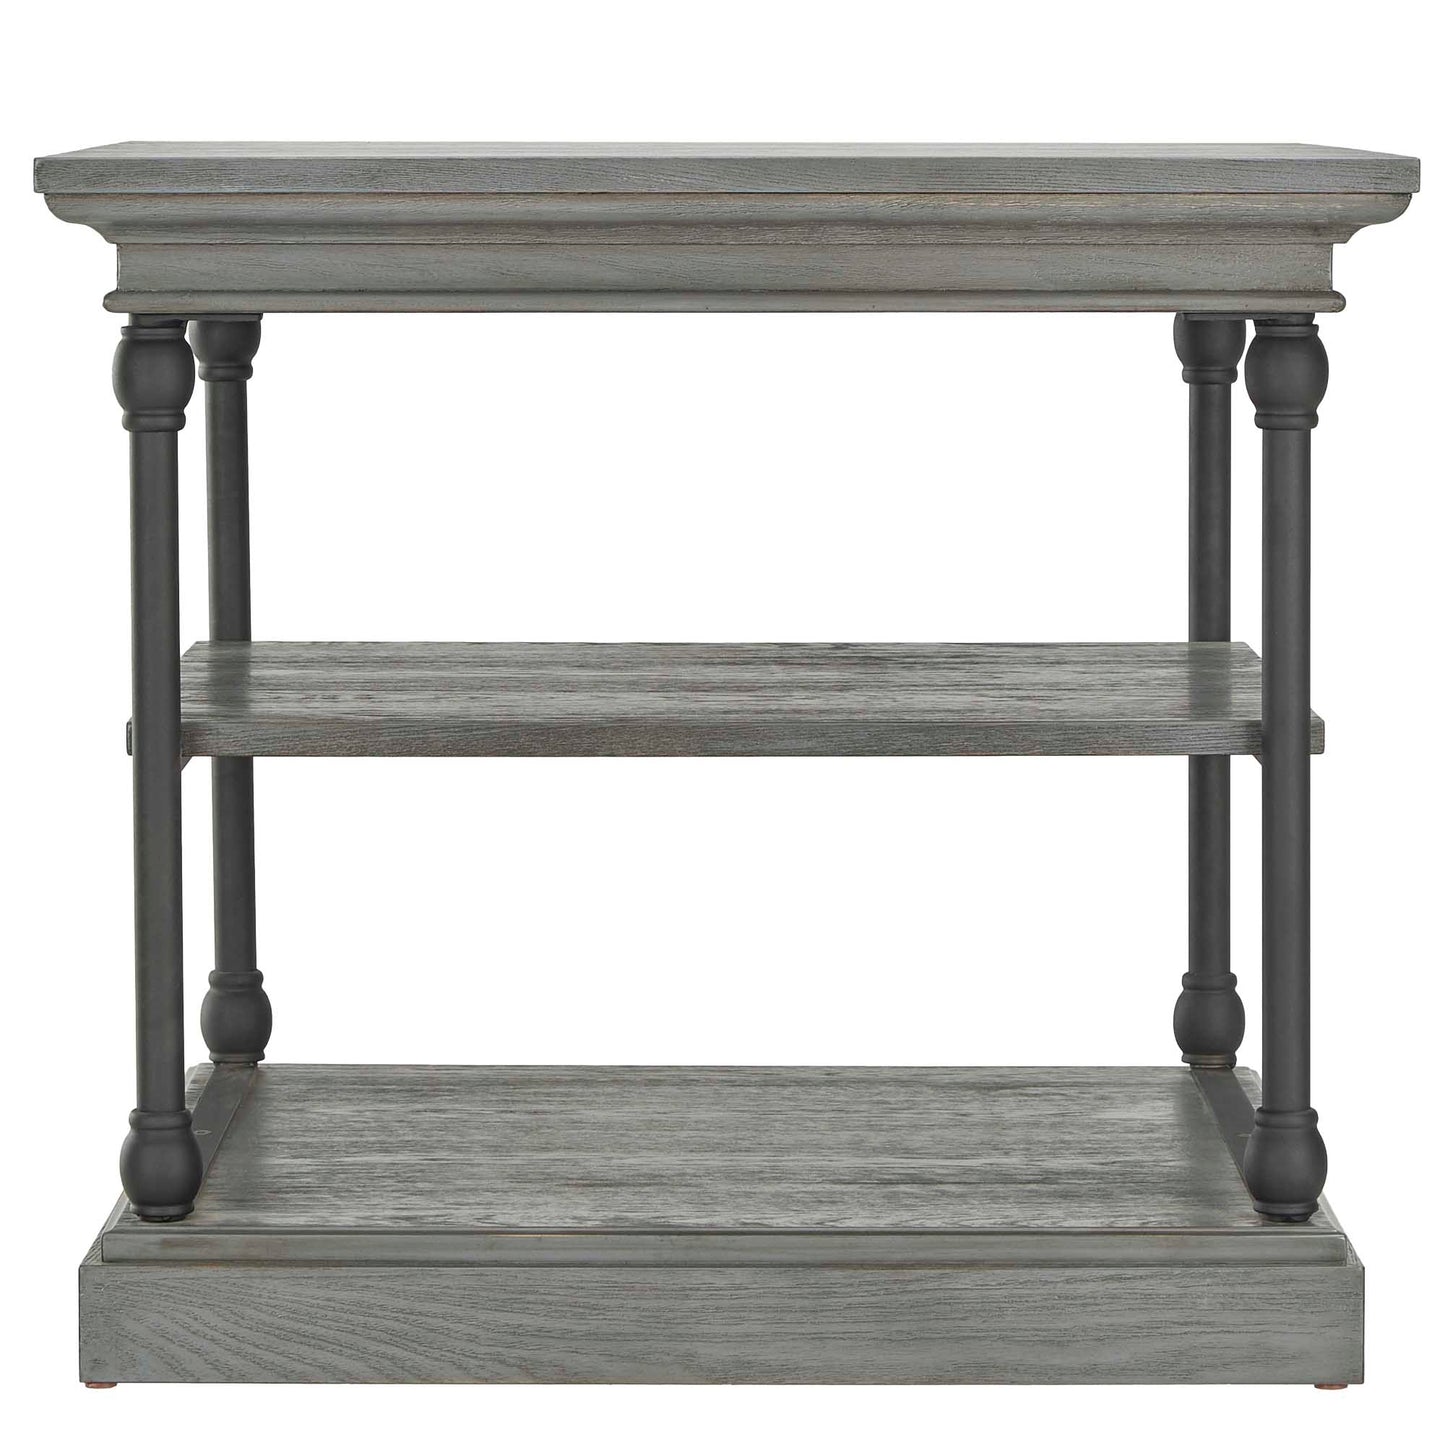 Cornice Accent Storage Side Table - Gray Finish